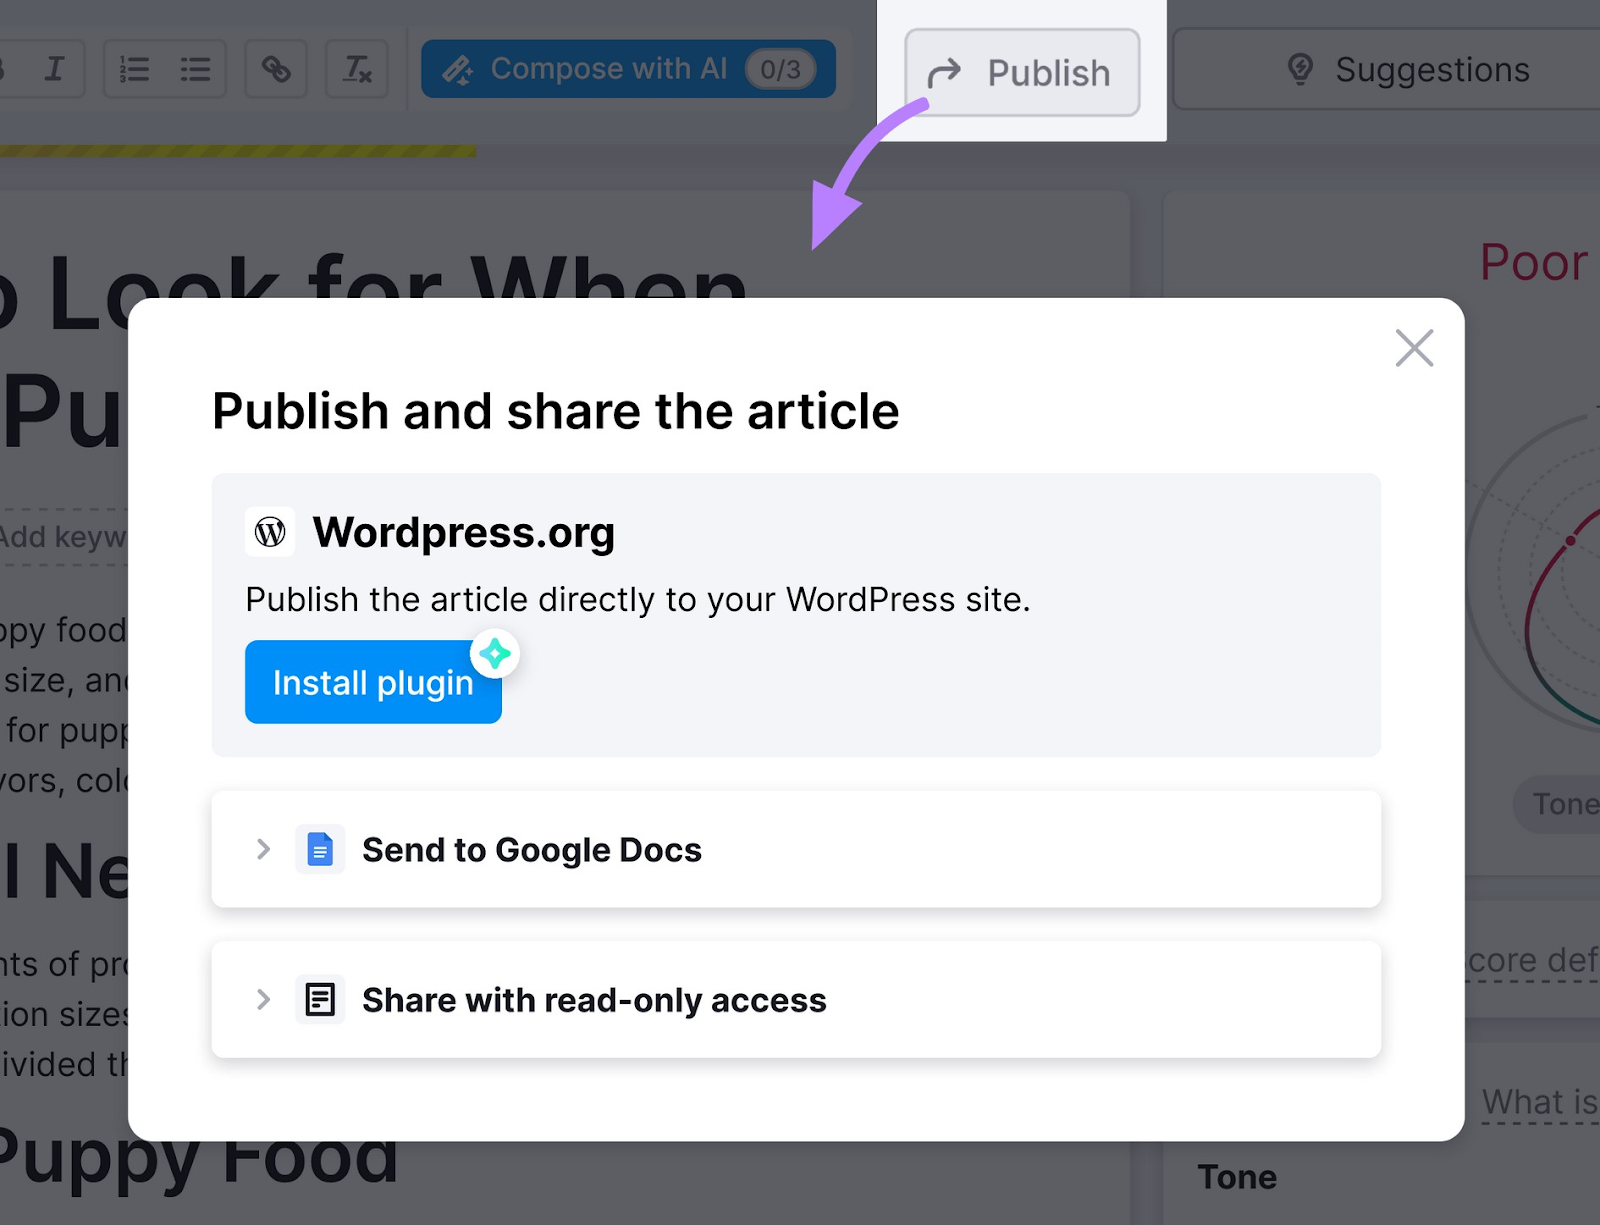 "Publish and share the article" section opens after clicking "Publish" button